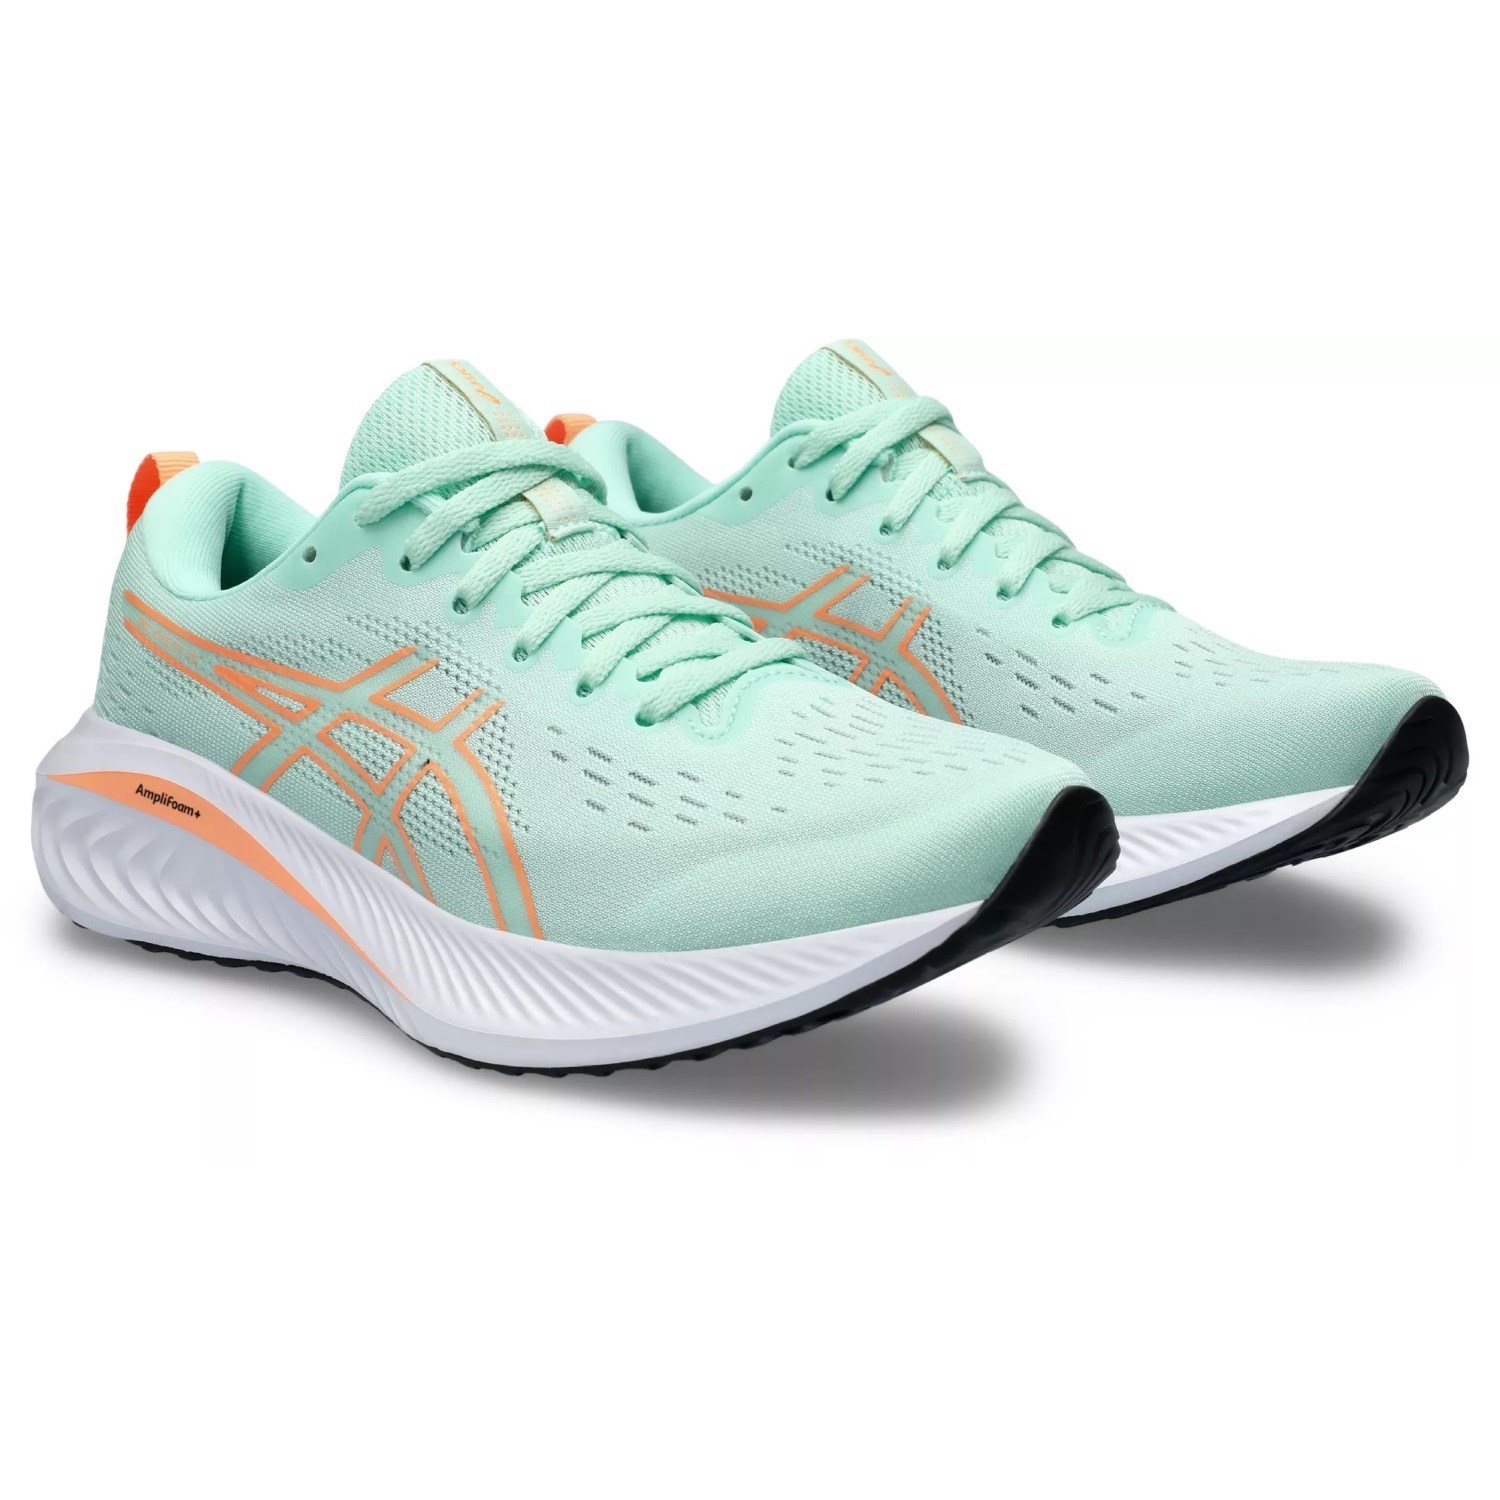 Asics Gel Excite 10 - Womens Running Shoes - Mint Tint/Bright Orange ...